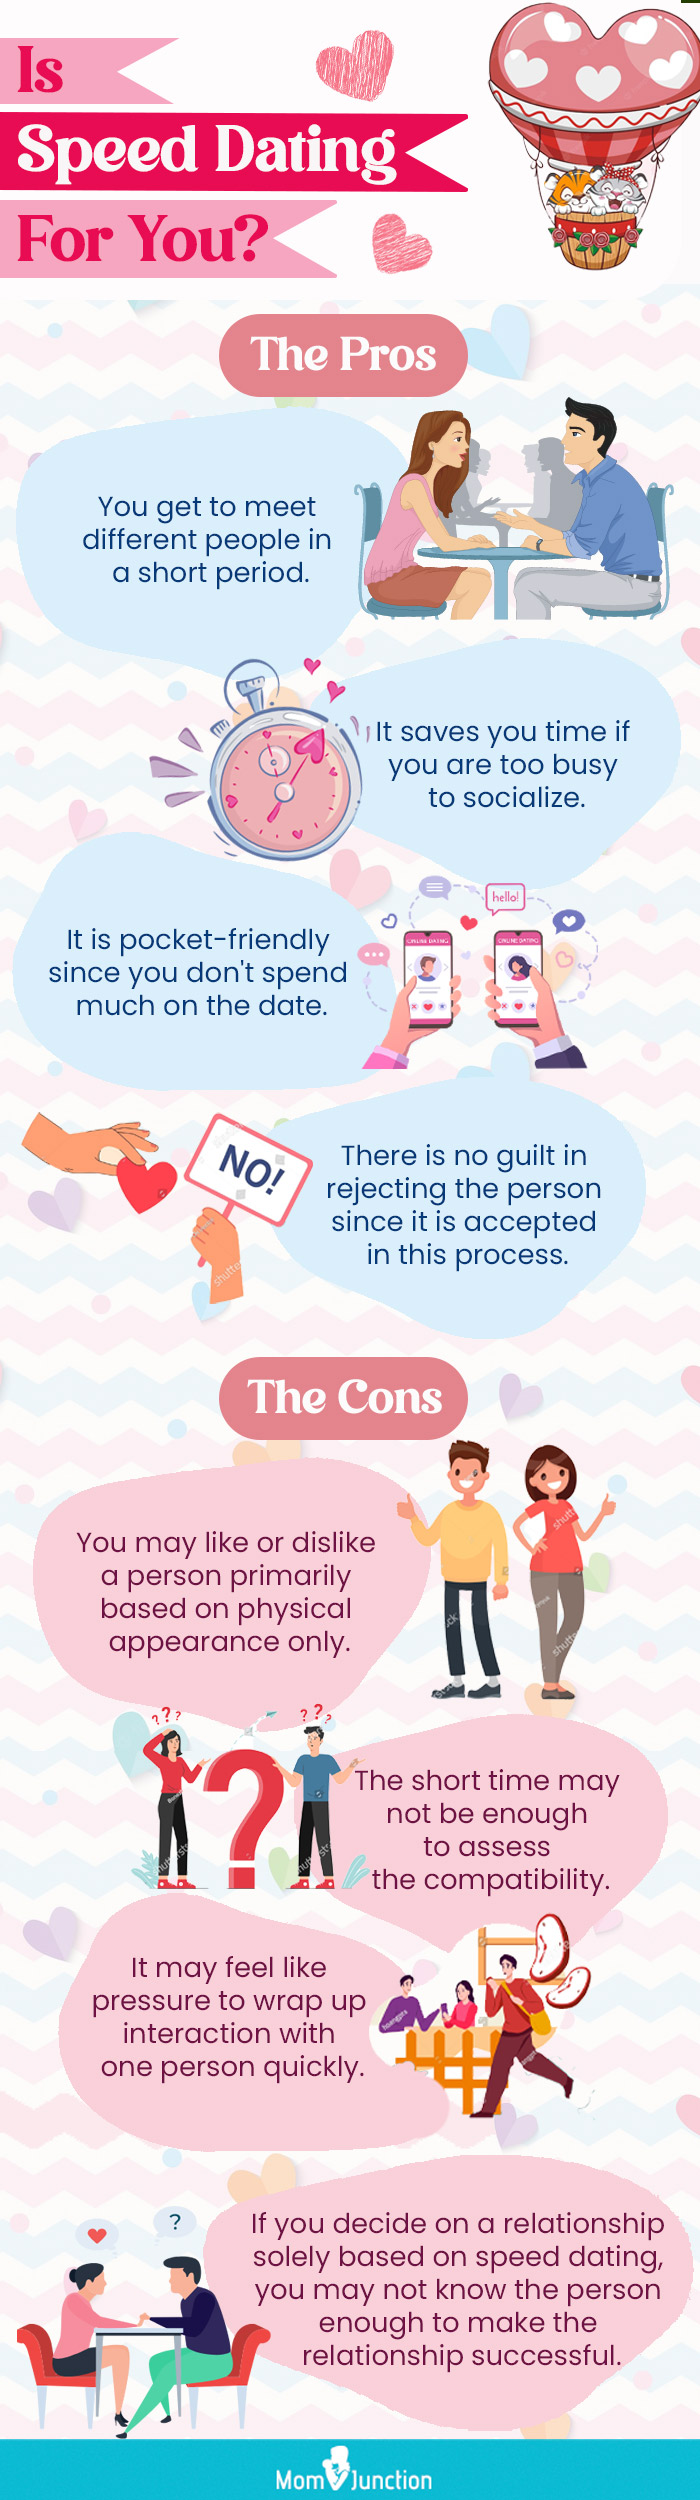 The Blind Date Guide to Dating